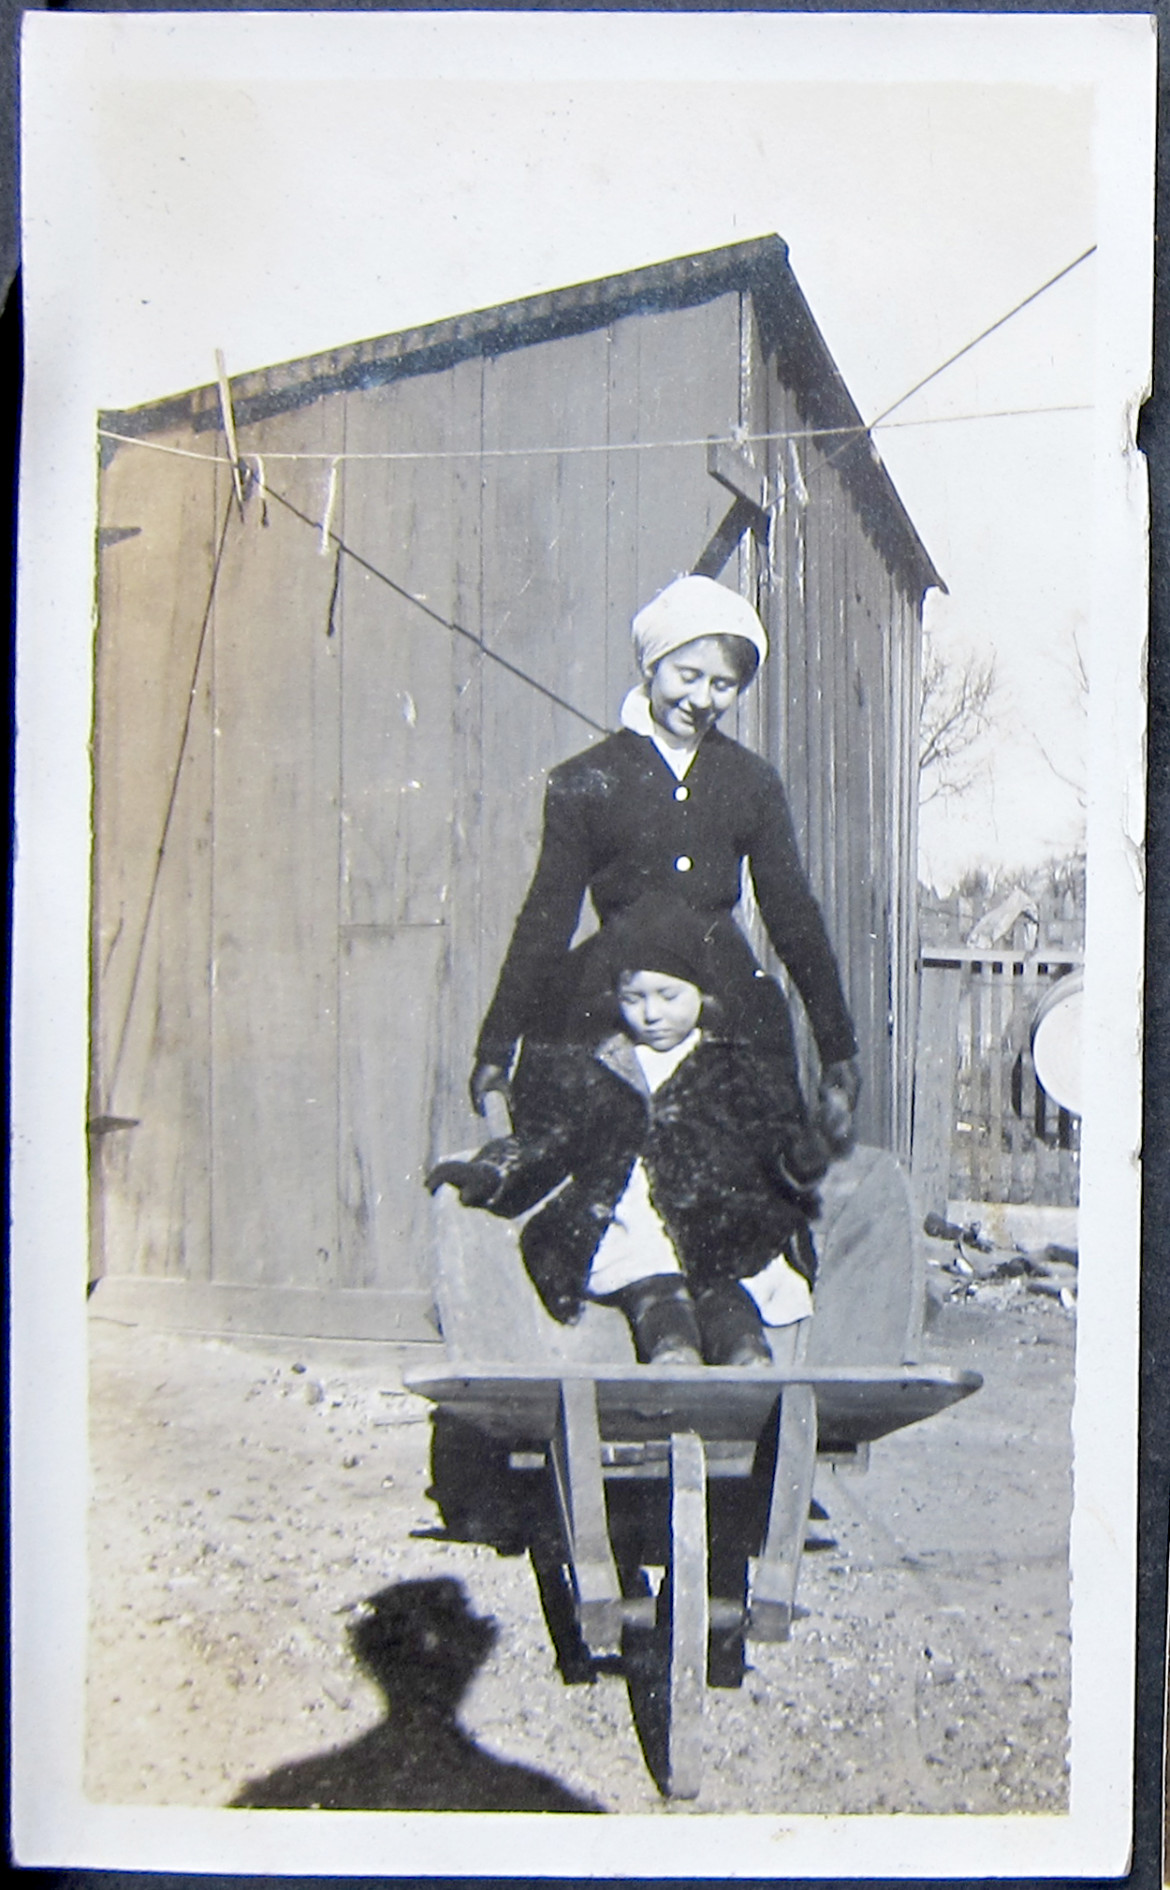 Amongst the Irwin collection are scenes from possibly two family farms.  These first four images are on the pages that contain photos from Talitha's pre marital life.  Here we have an unidentified woman wheelbarrowing an unidentified child.  the only thing I can say for sure is that is a wheel barrow.